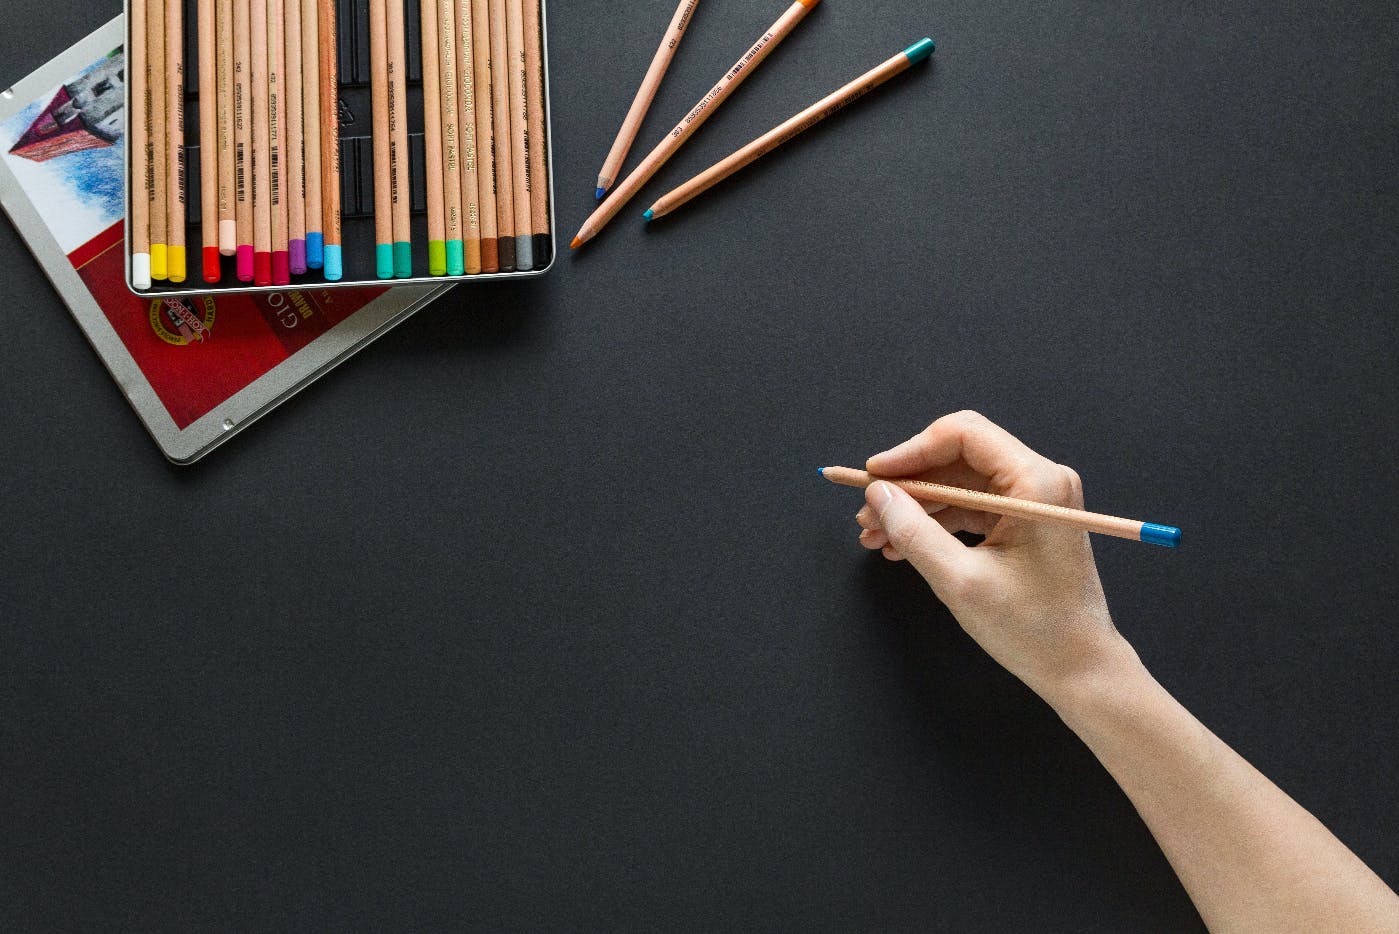 A tin of colored pencils and a hand holding one about to draw on a black surface